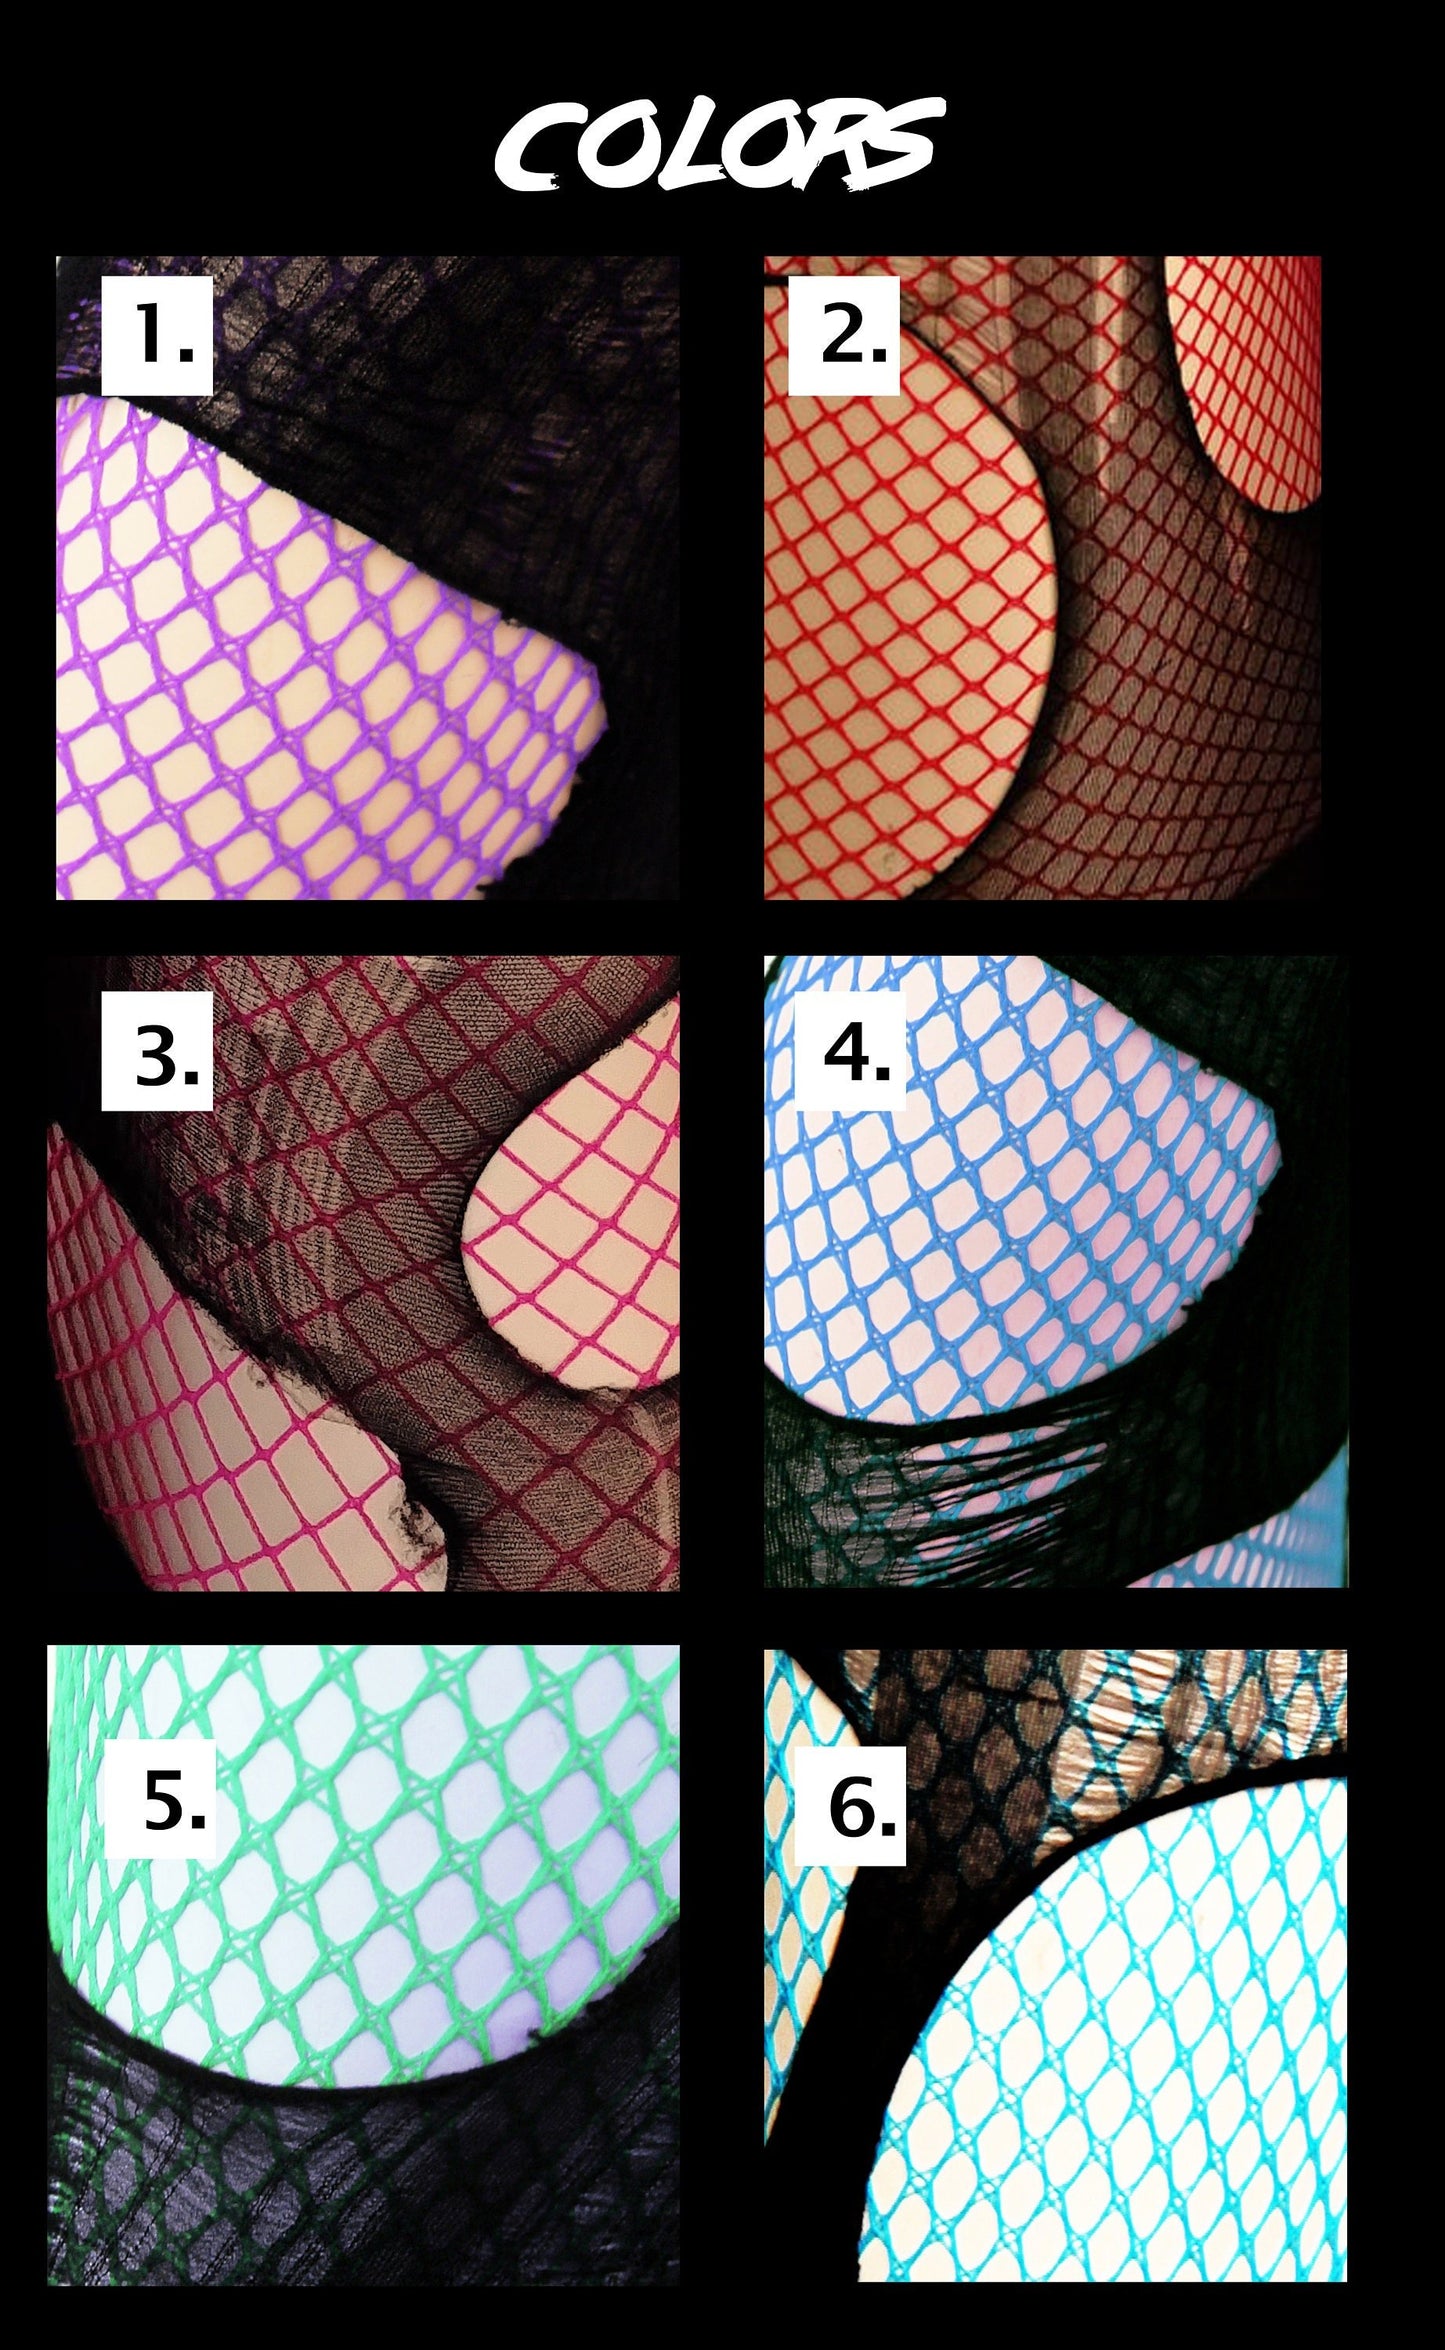 Double layered tattered & torn fishnet tights | pink / Black